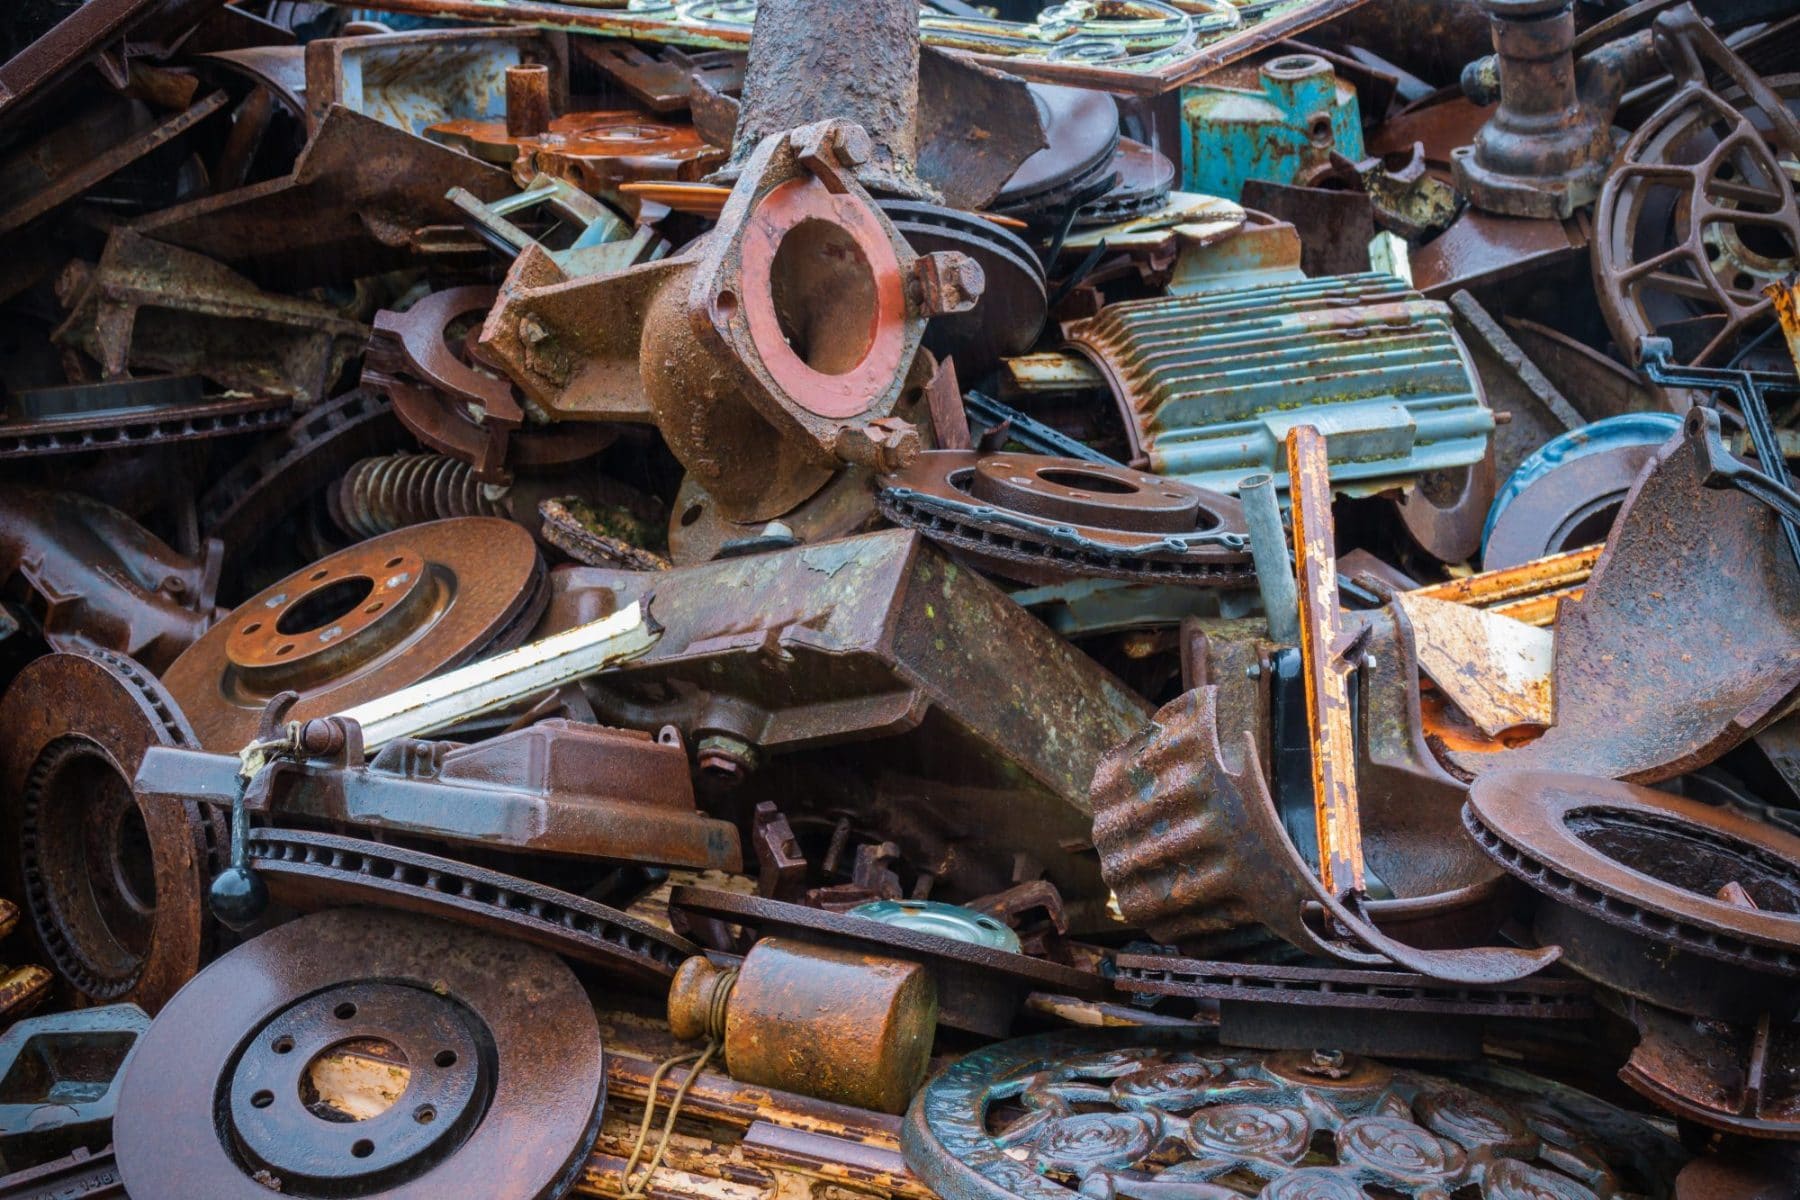 Ferrous and Nonferrous material needs to be sorted correctly for safety